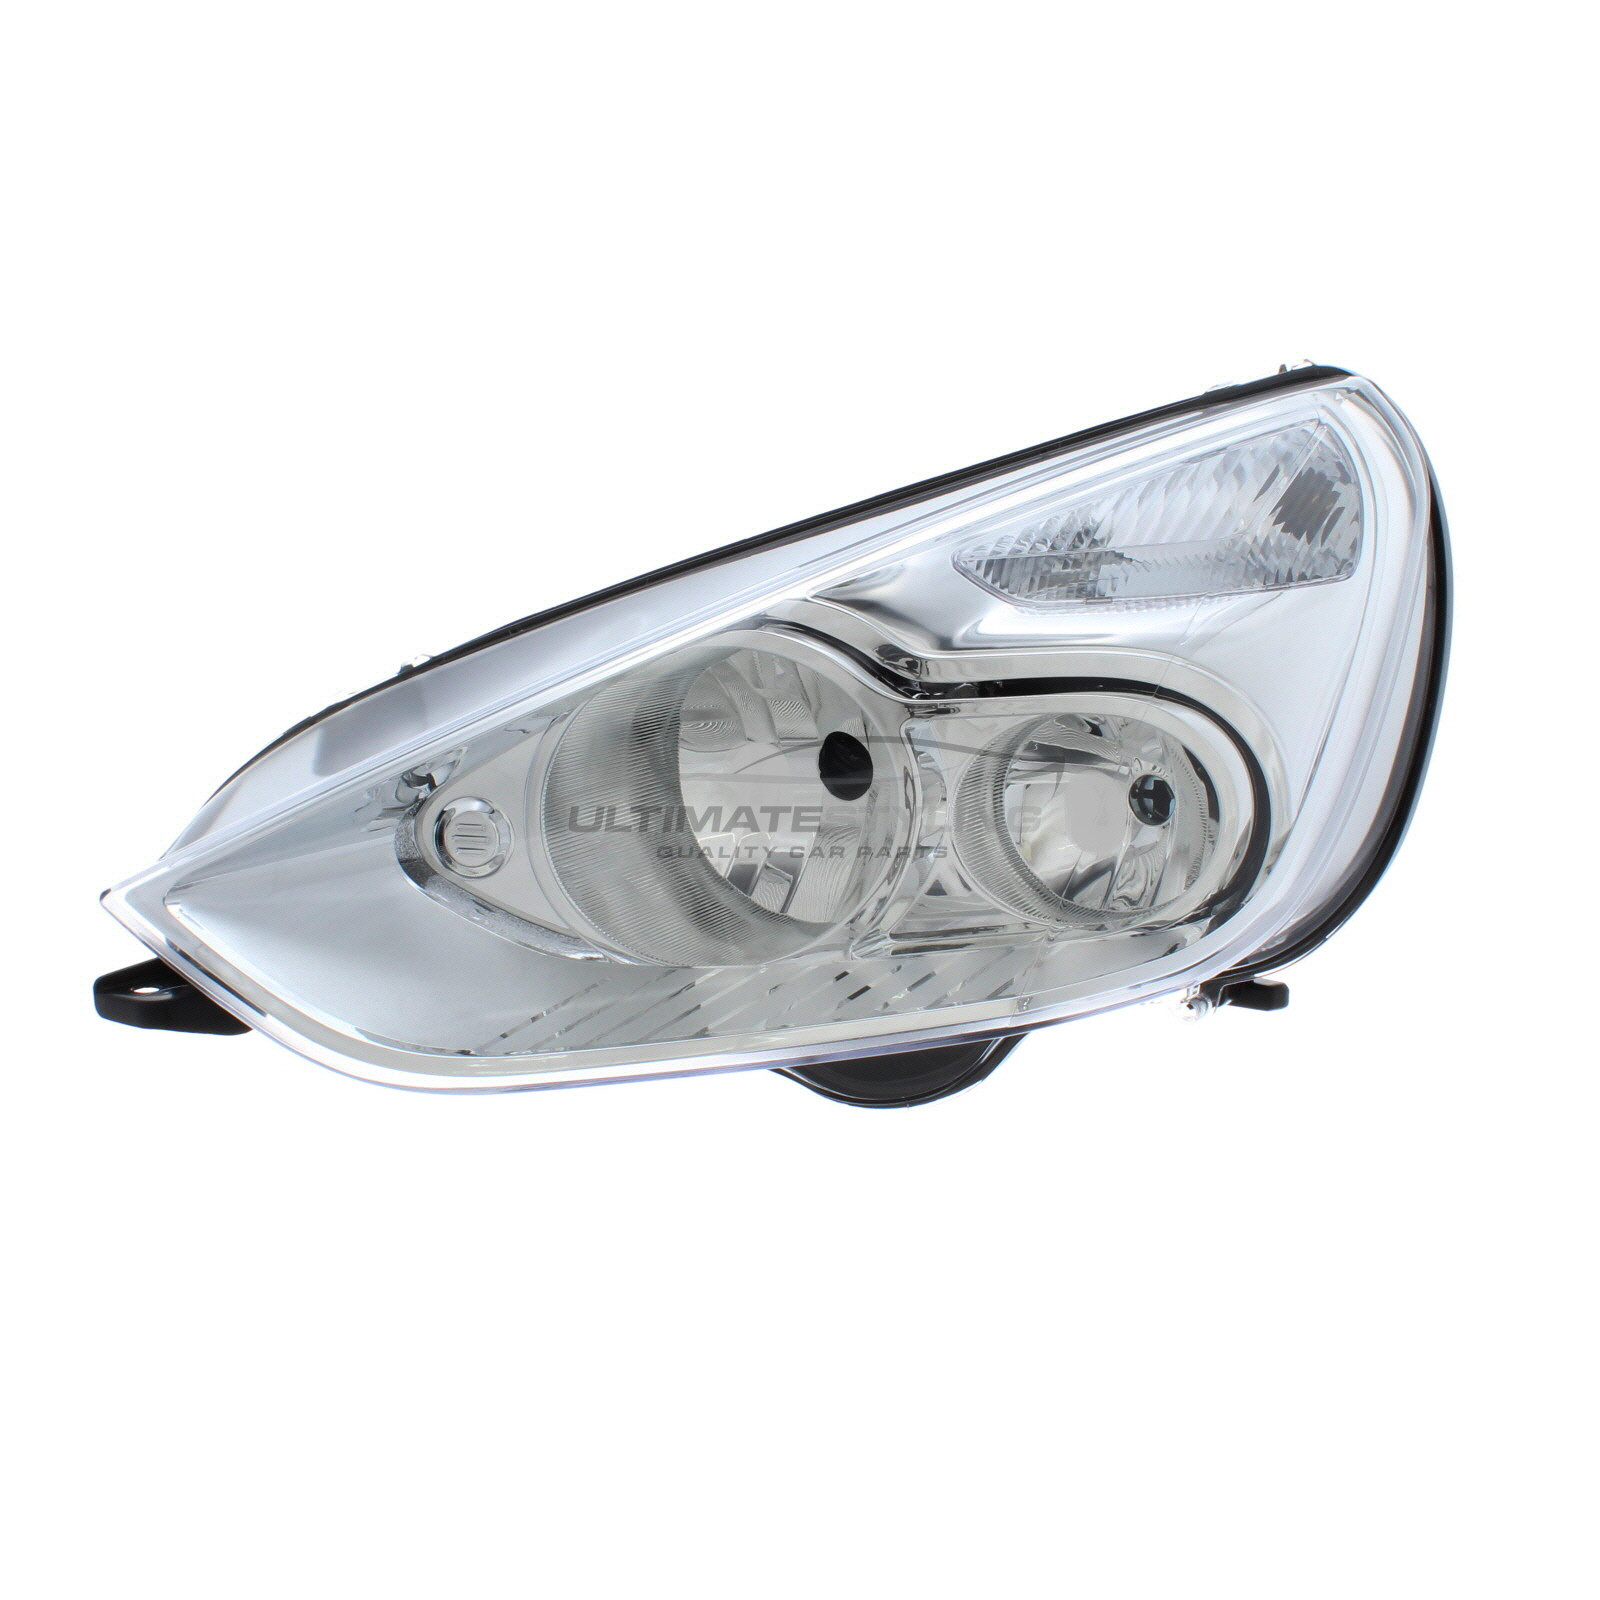 Ford Galaxy 2006-2015, S-MAX 2006-2015 Halogen, Electric With Motor, Chrome Headlight / Headlamp Passengers Side (LH)